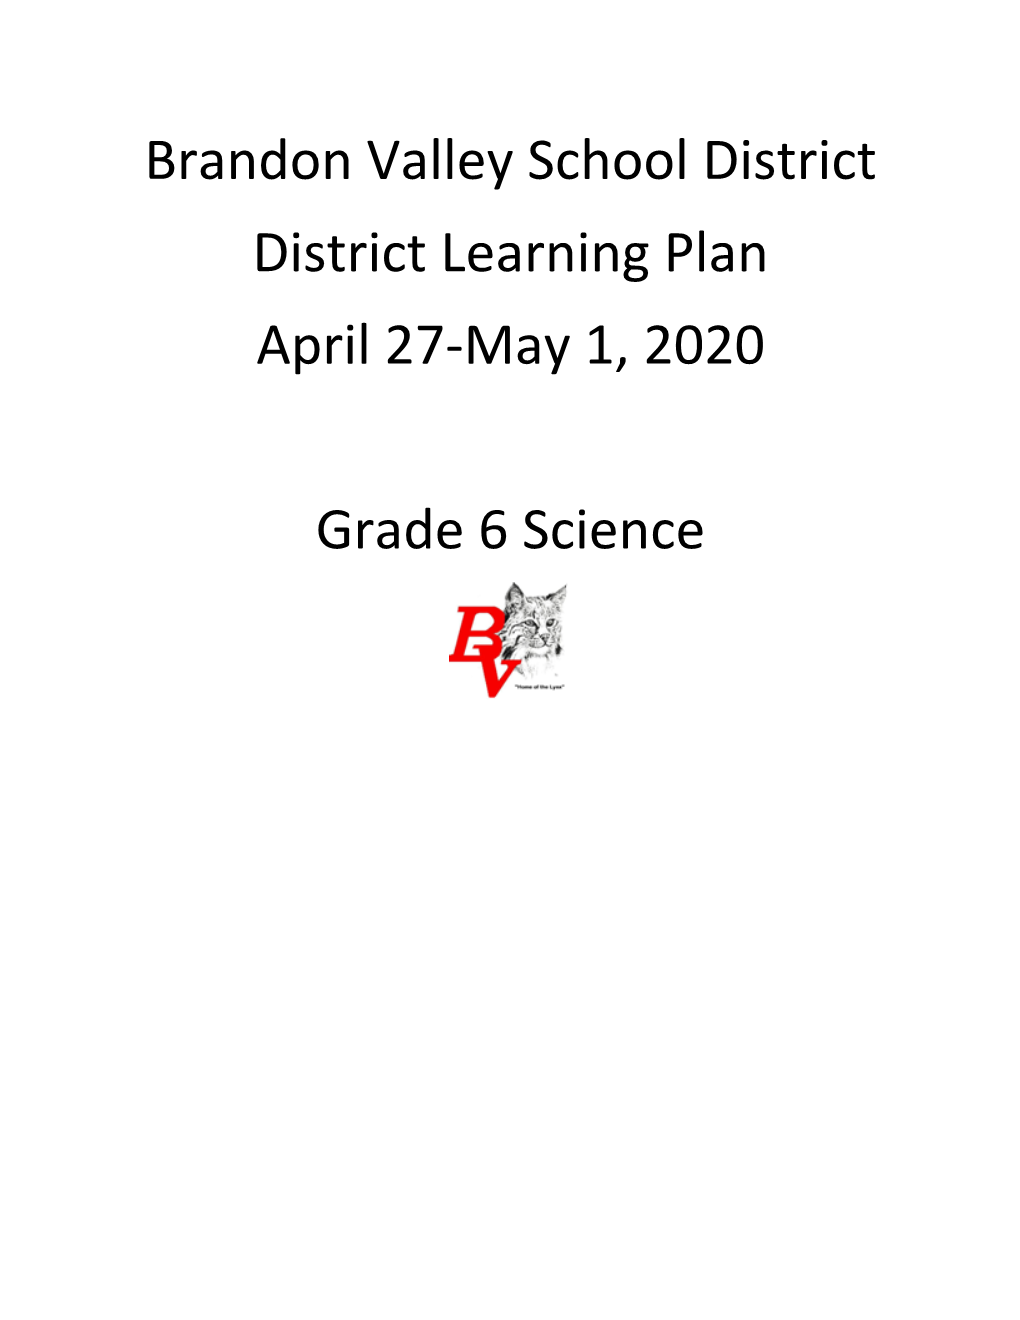 Brandon Valley School District District Learning Plan April 27-May 1, 2020